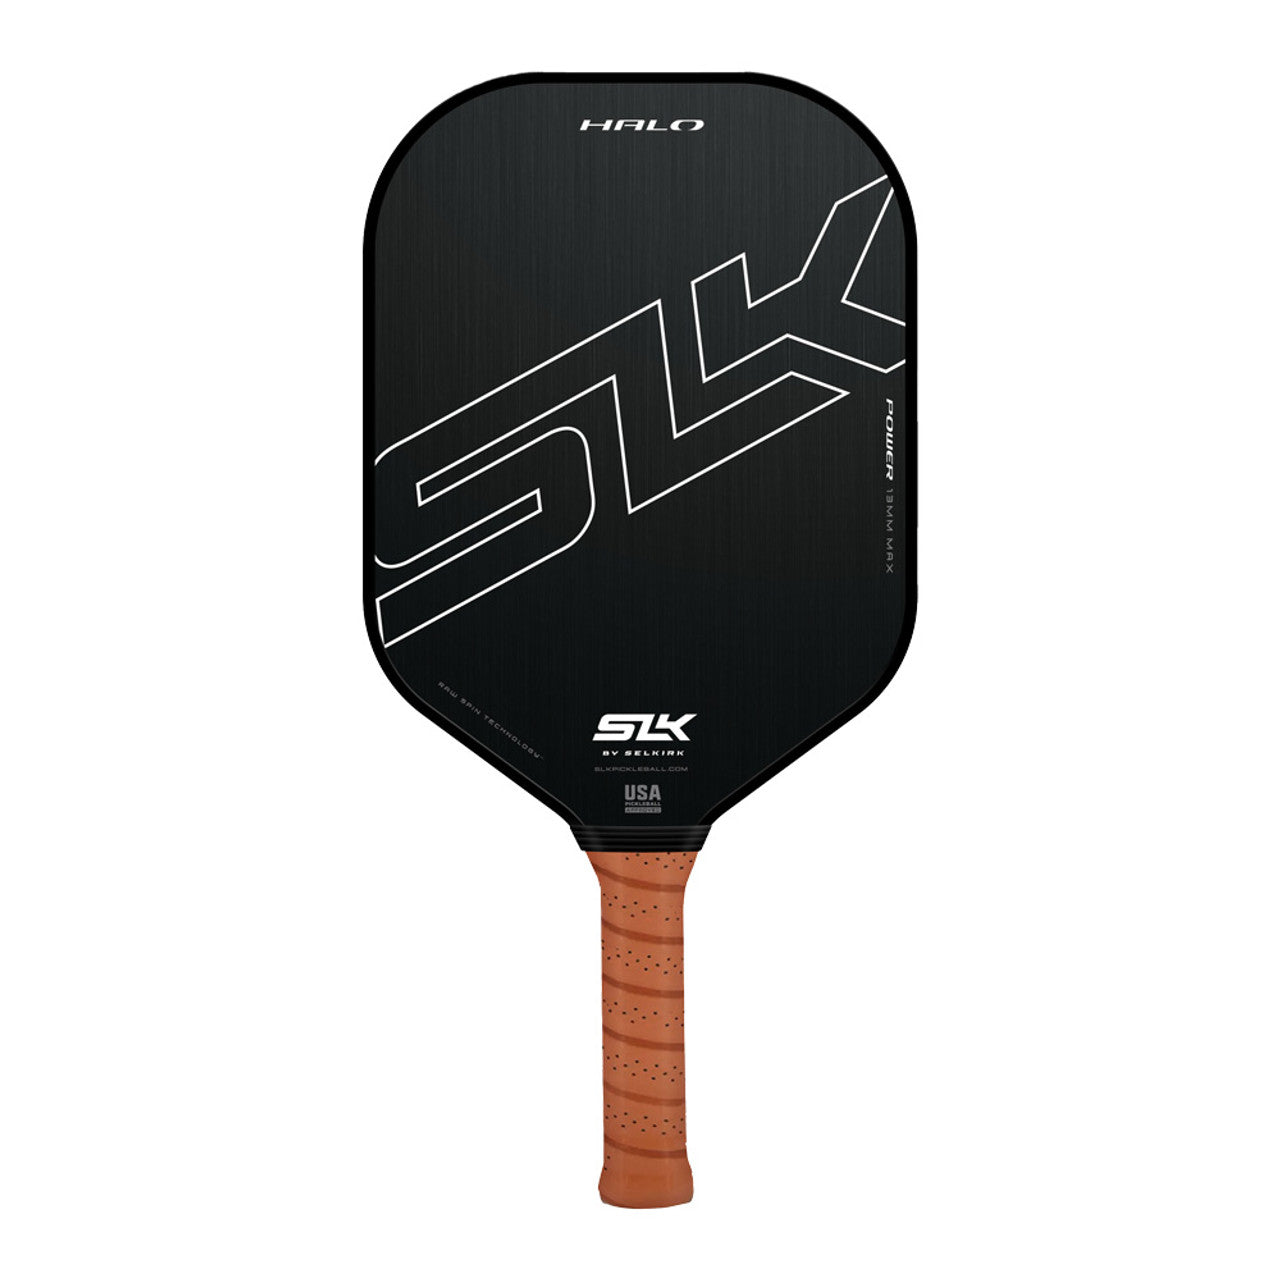 A Selkirk SLK Halo XL Pickleball Paddle in black and brown on a white background.